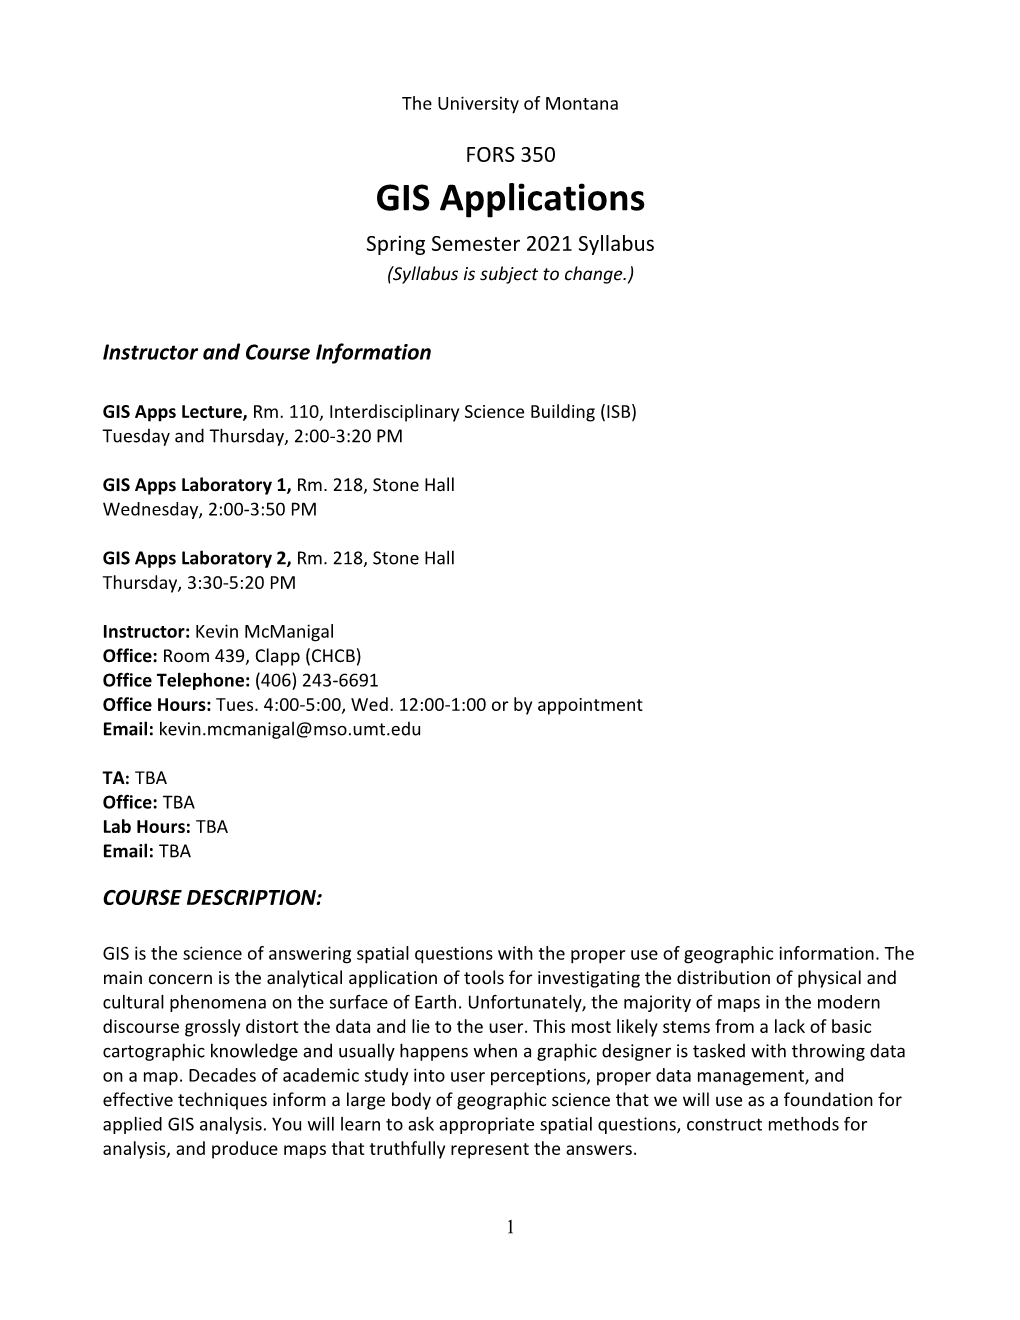 GIS Applications Spring Semester 2021 Syllabus (Syllabus Is Subject to Change.)